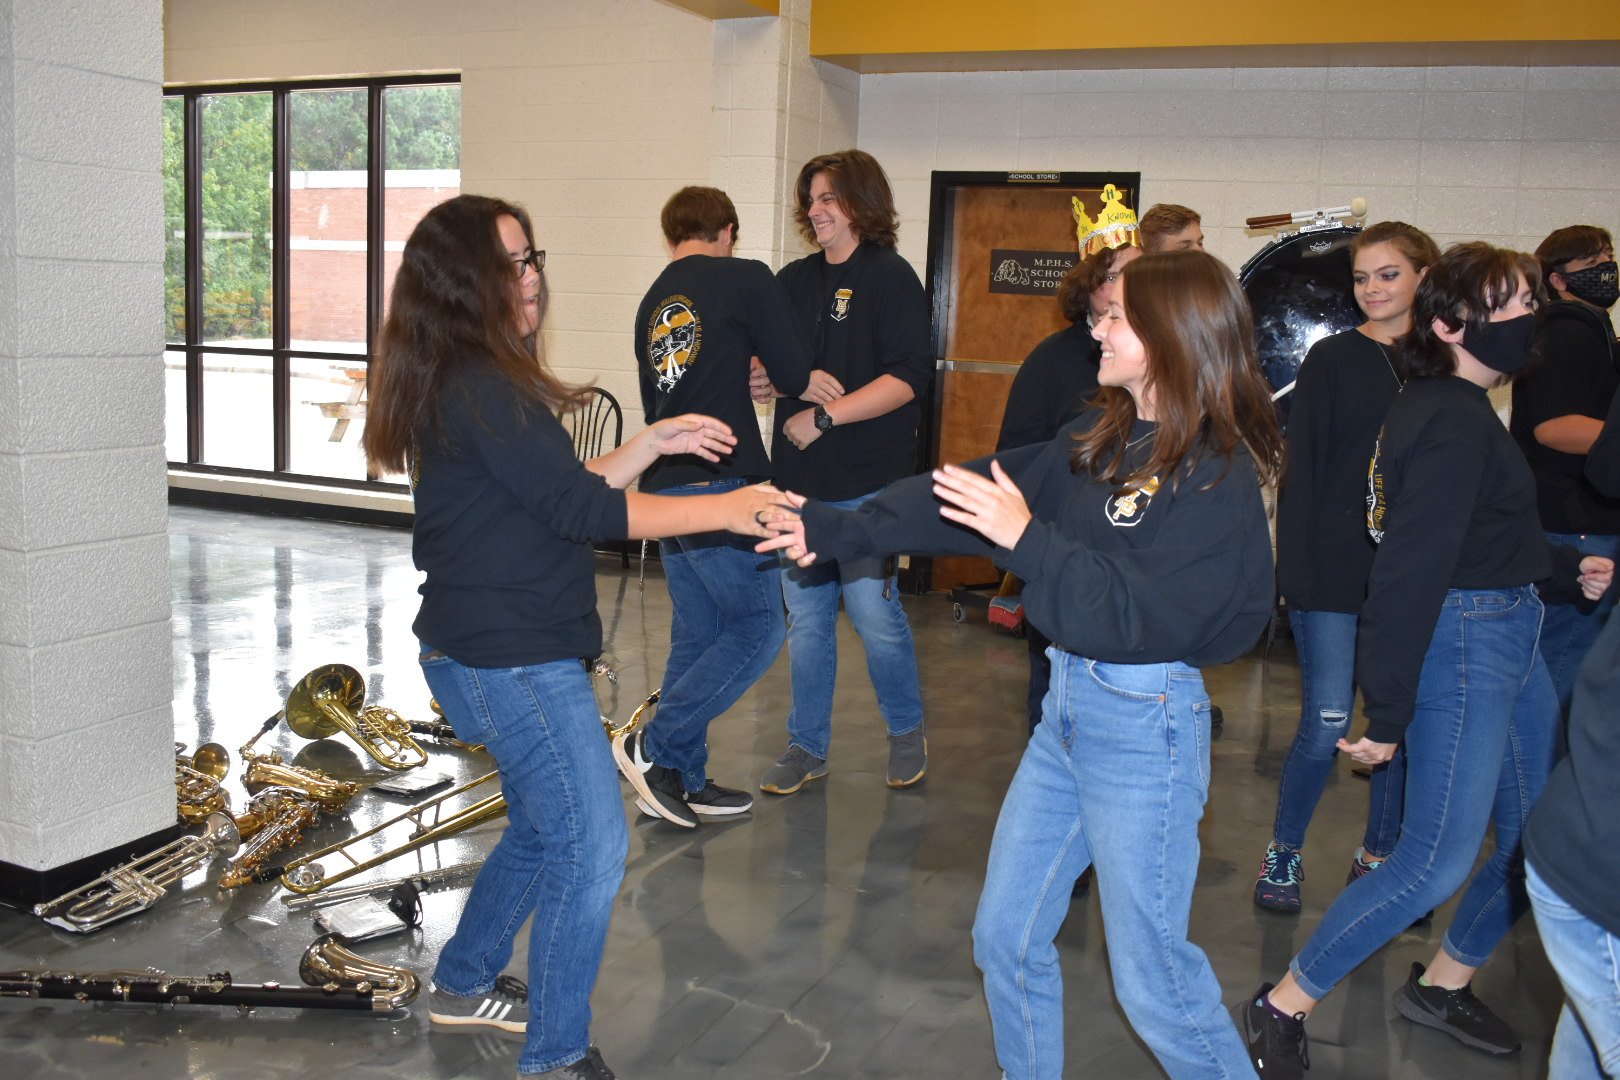  Senior band members, Marissa Hollis and Heather Tillman, do their special handshake as the cheerleaders and auxiliary team hype up the rest of the seniors before the big Homecoming Pep Rally. 